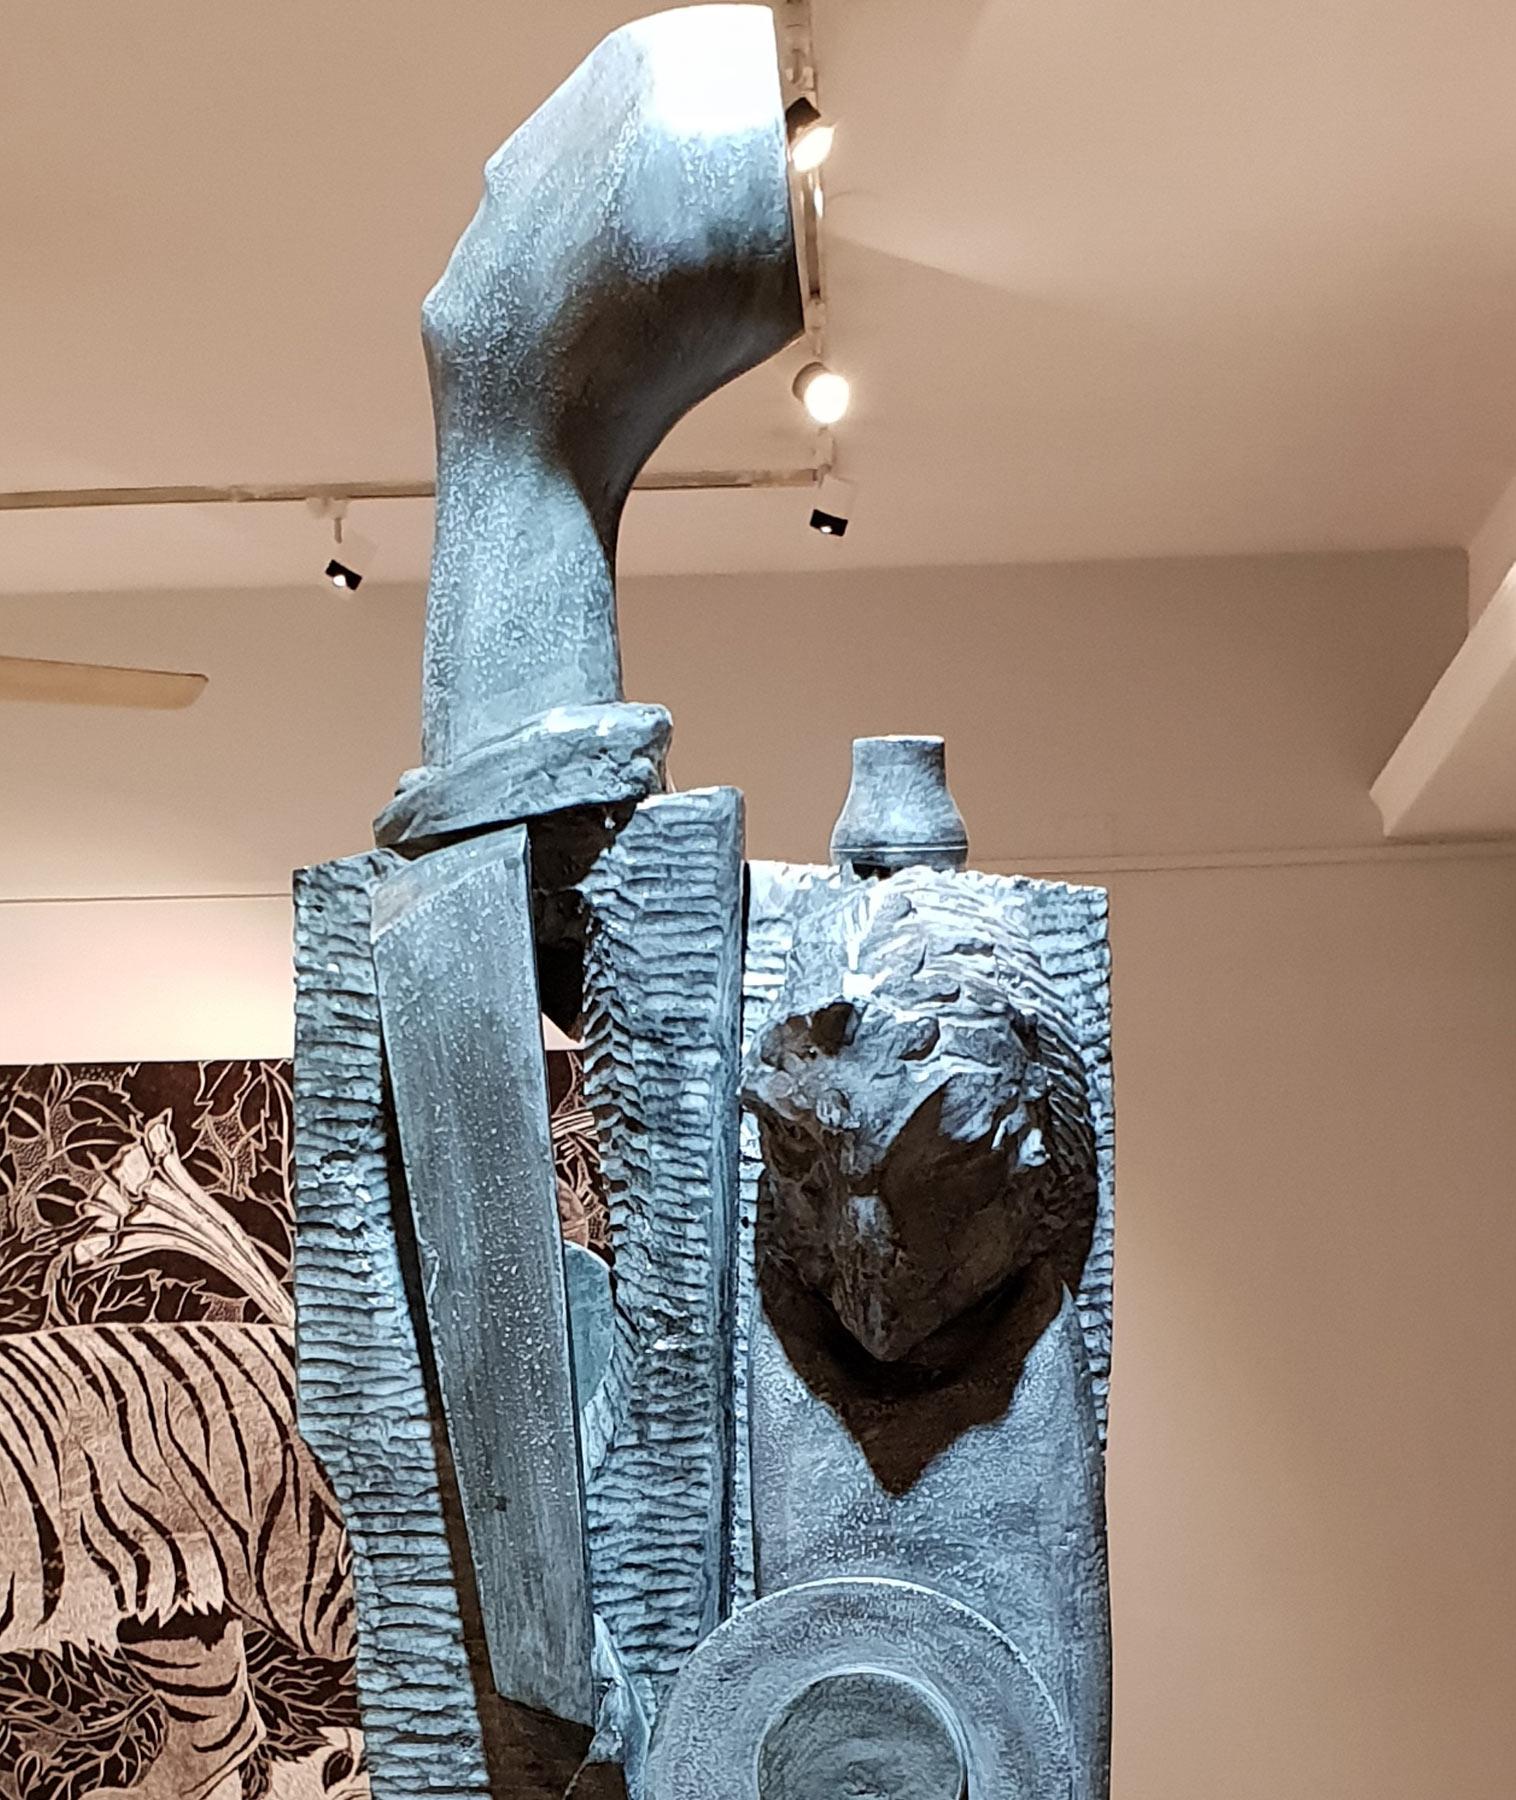 Sunil Kumar Das - Family - 37 x 12 x 6 inches
Wood & Fiberglass. 

Style : In his works, Das strives to simplify, elements and features- as if he wants to distill freely from the figure of animal or human, the essence of a sensibility that is at